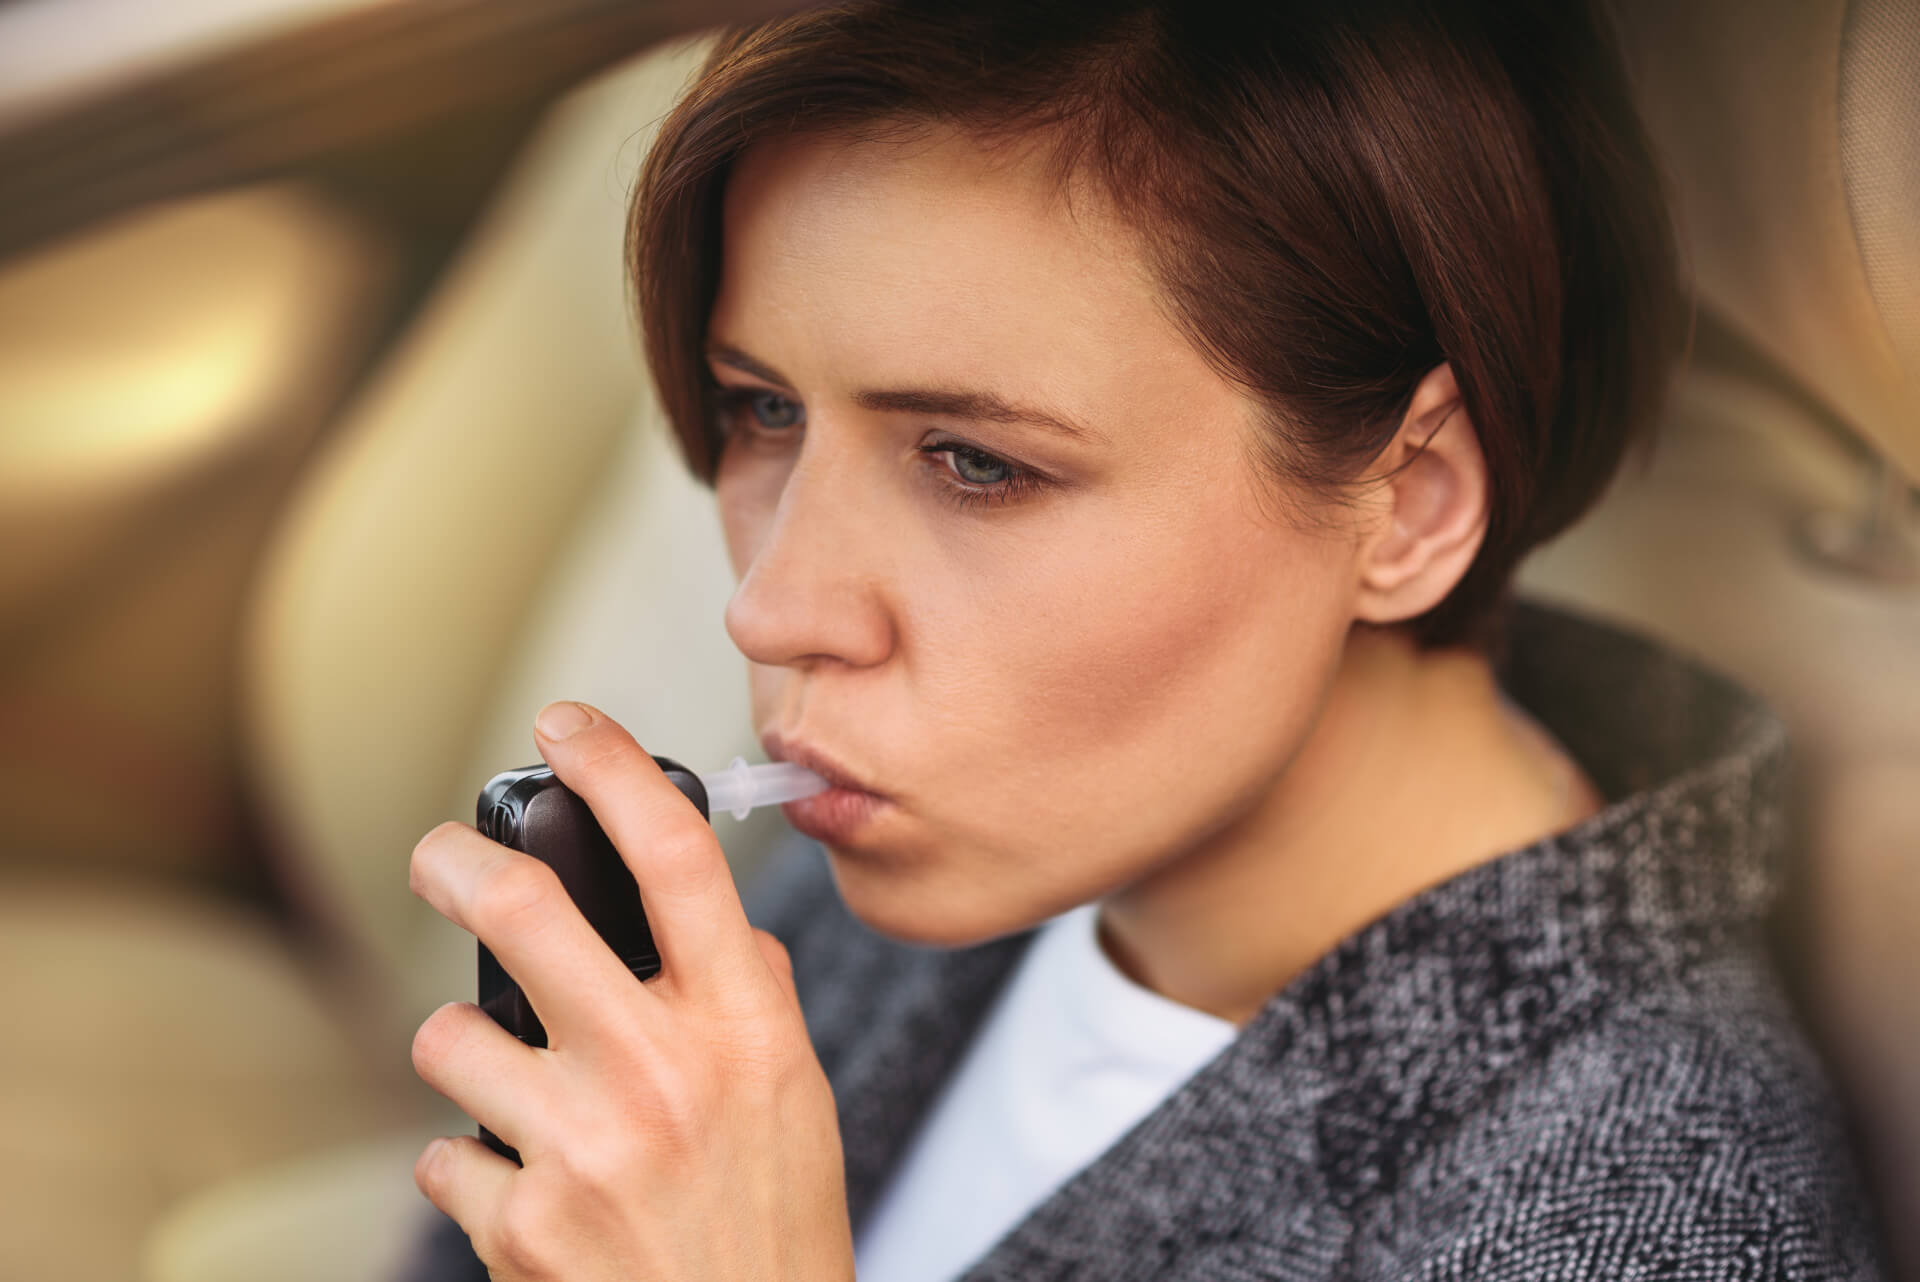 Can You Refuse a DUI Test?